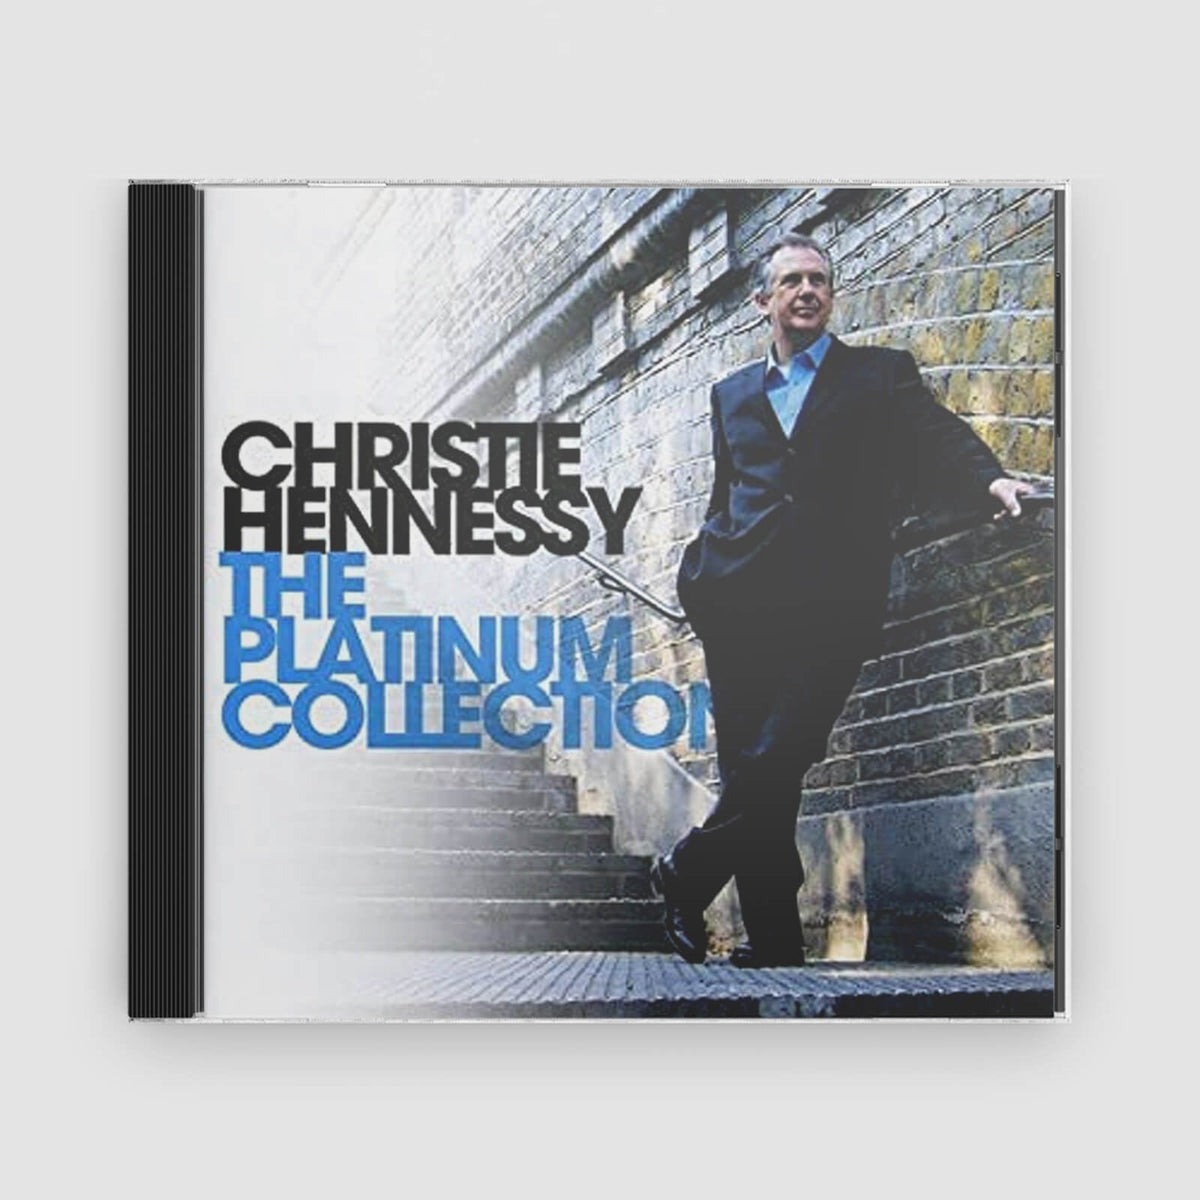 Christie Hennessy : The Platinum Collection